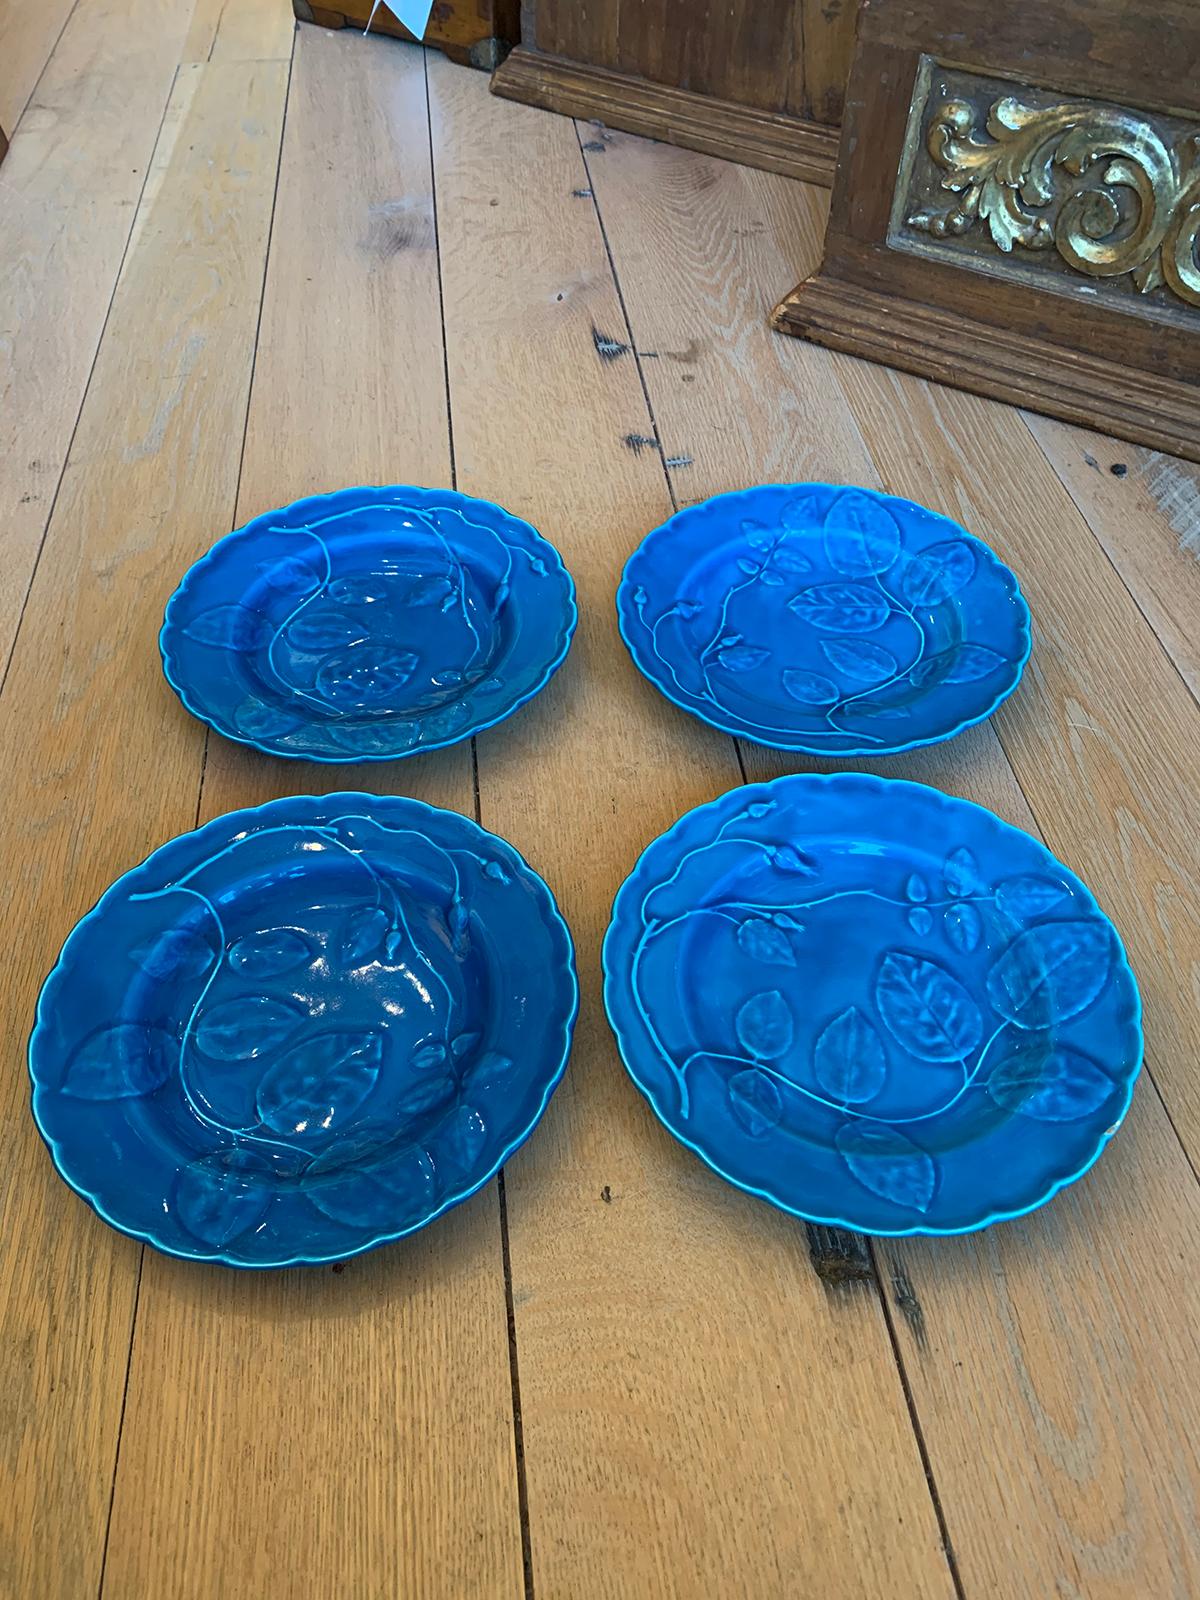 Set of Four circa 1875 Blue Minton Plates after Royal Worcester's 